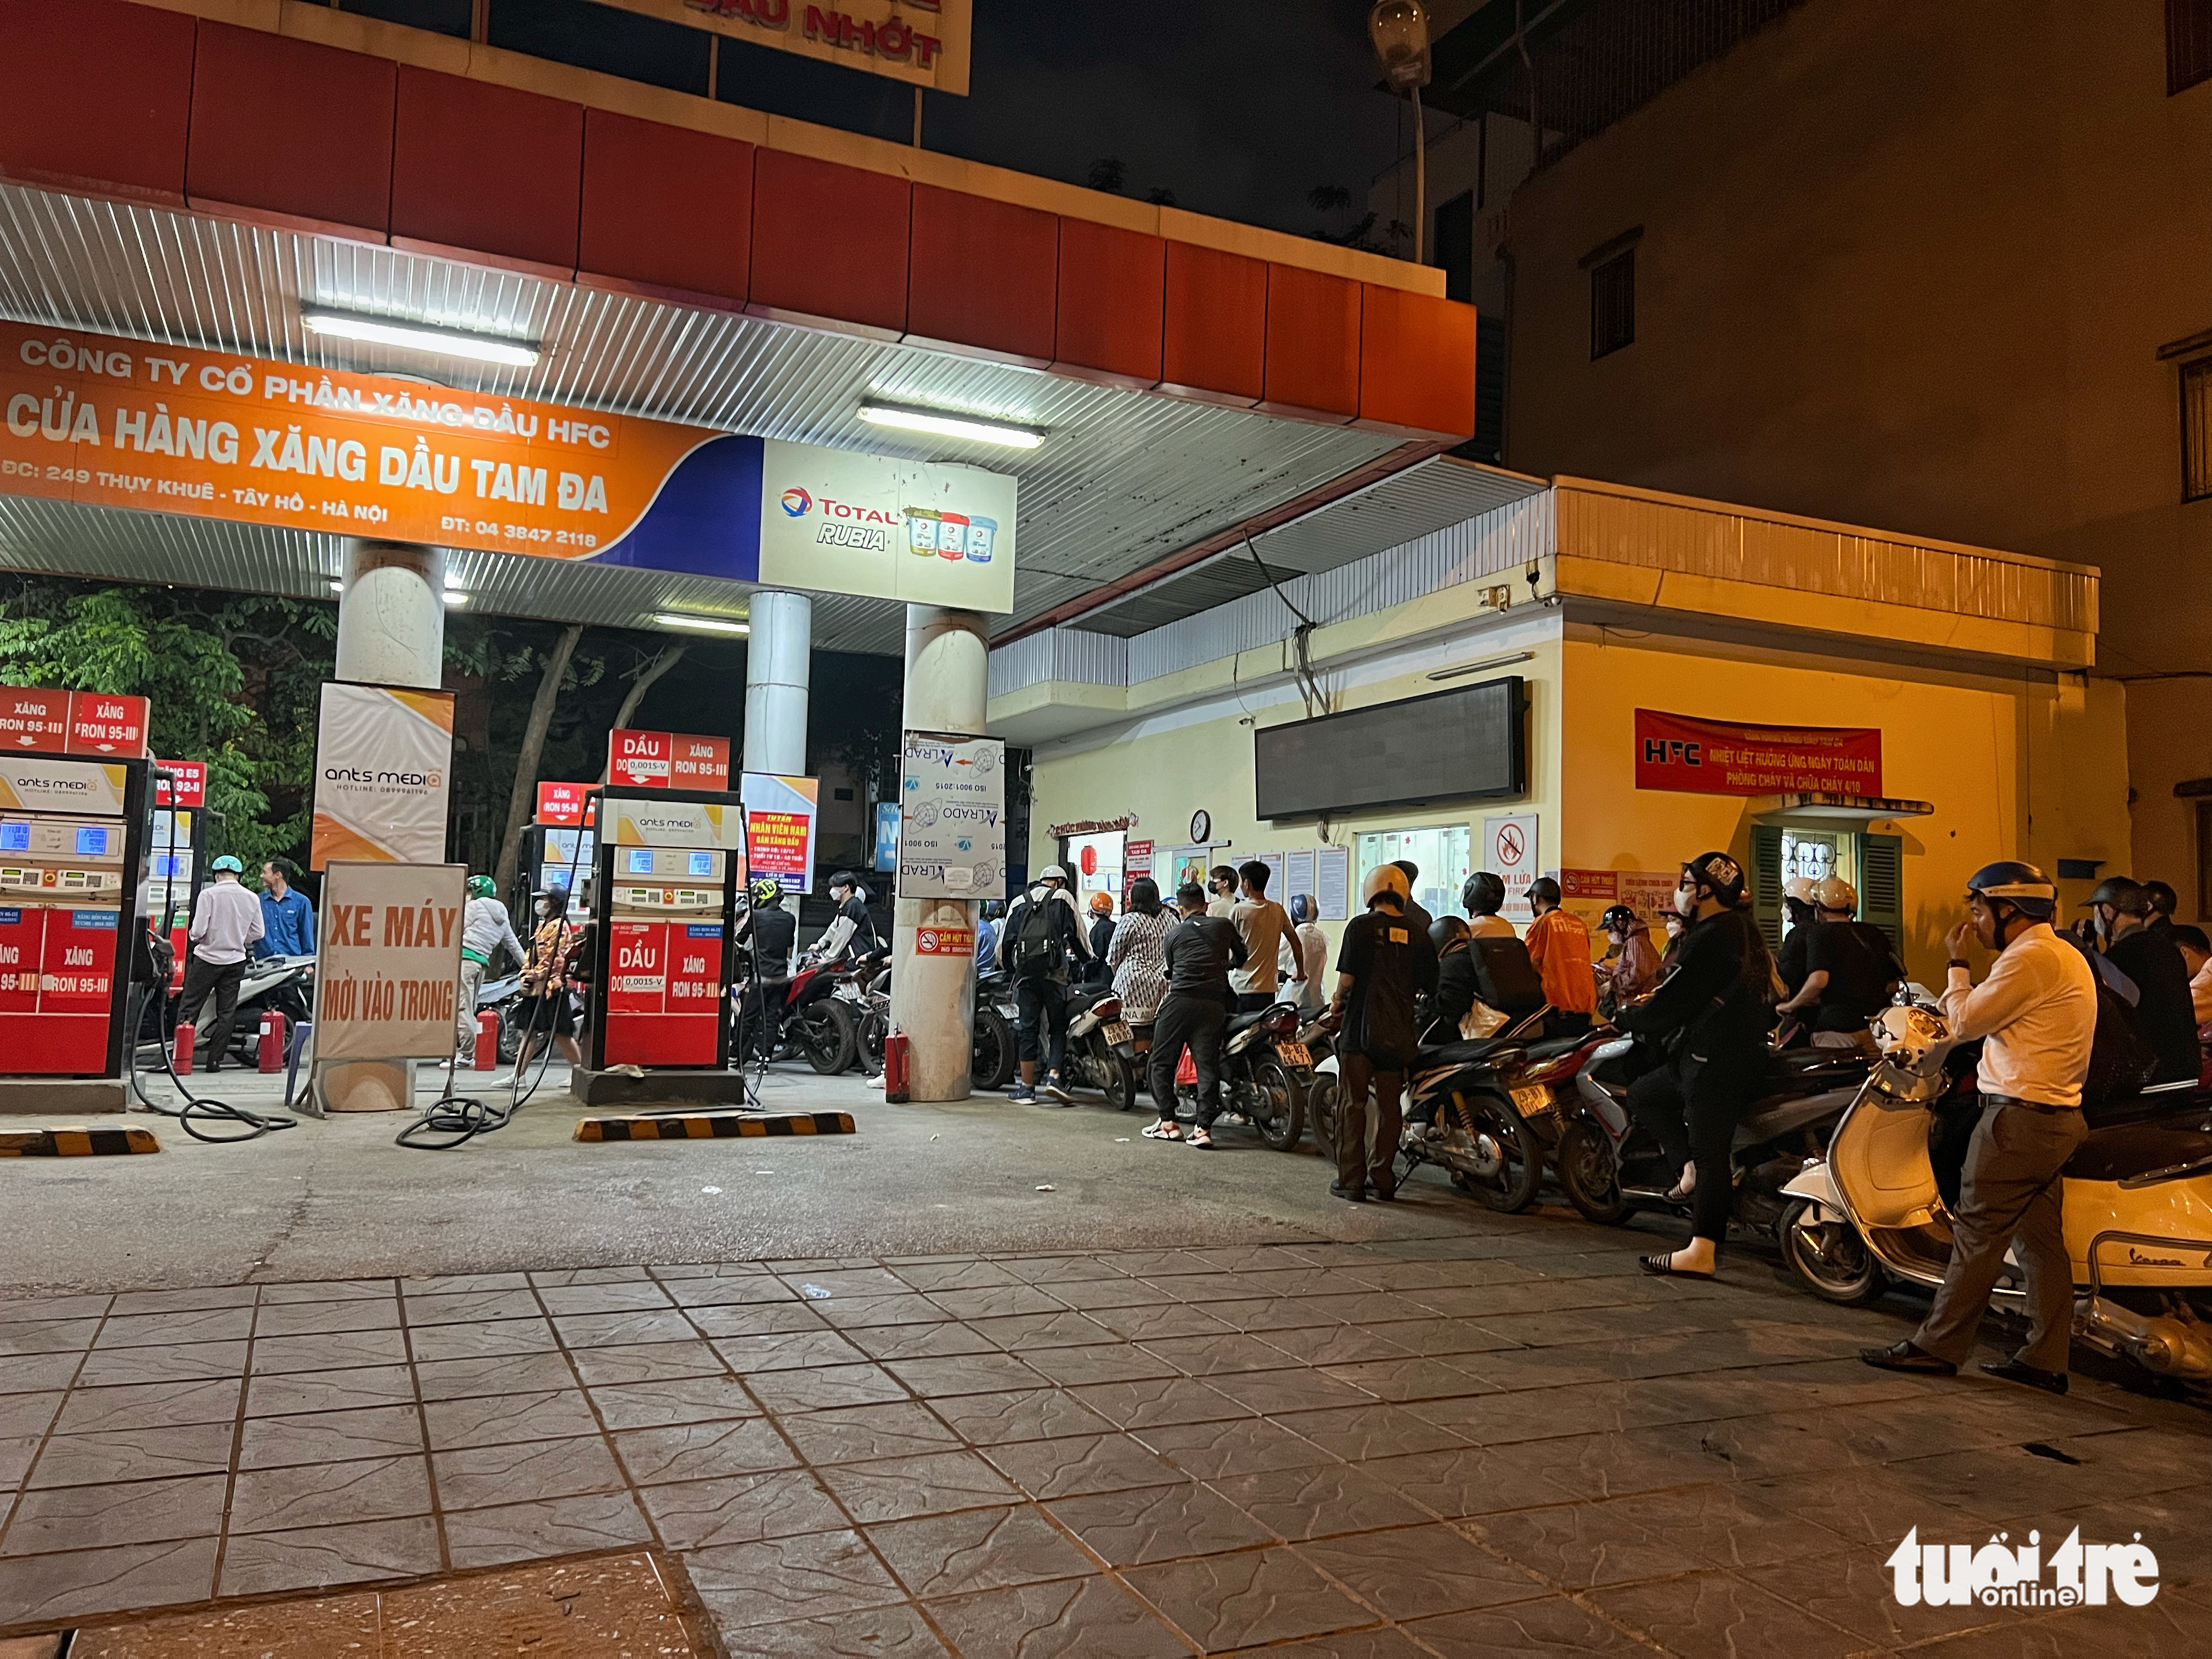 Motorcyclists queue up at HFC Tam Da filling station in Tay Ho District, Hanoi at 11:00 pm on November 10, 2022. Photo: Pham Tuan / Tuoi Tre